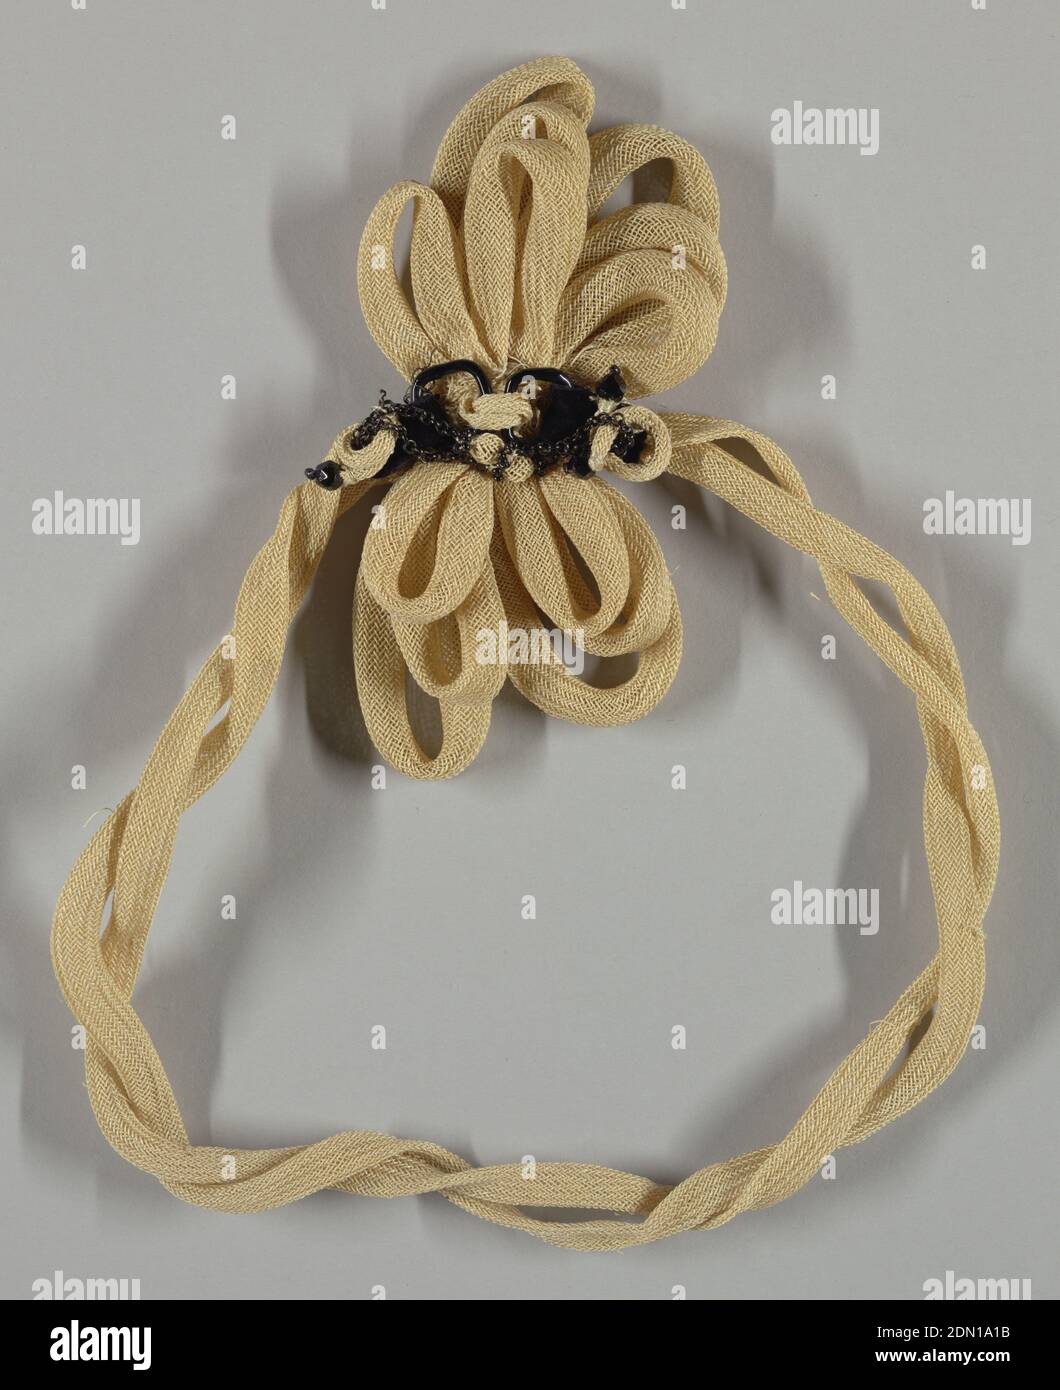 Trimming, Medium: plant fiber, metal, glass beads Technique: braided, Ornament in the form of a rosette with streamers. At the center of the rosette are two black buckles with black velvet bands, thin metal chain and black beads., France, late 19th century, trimmings, Trimming Stock Photo